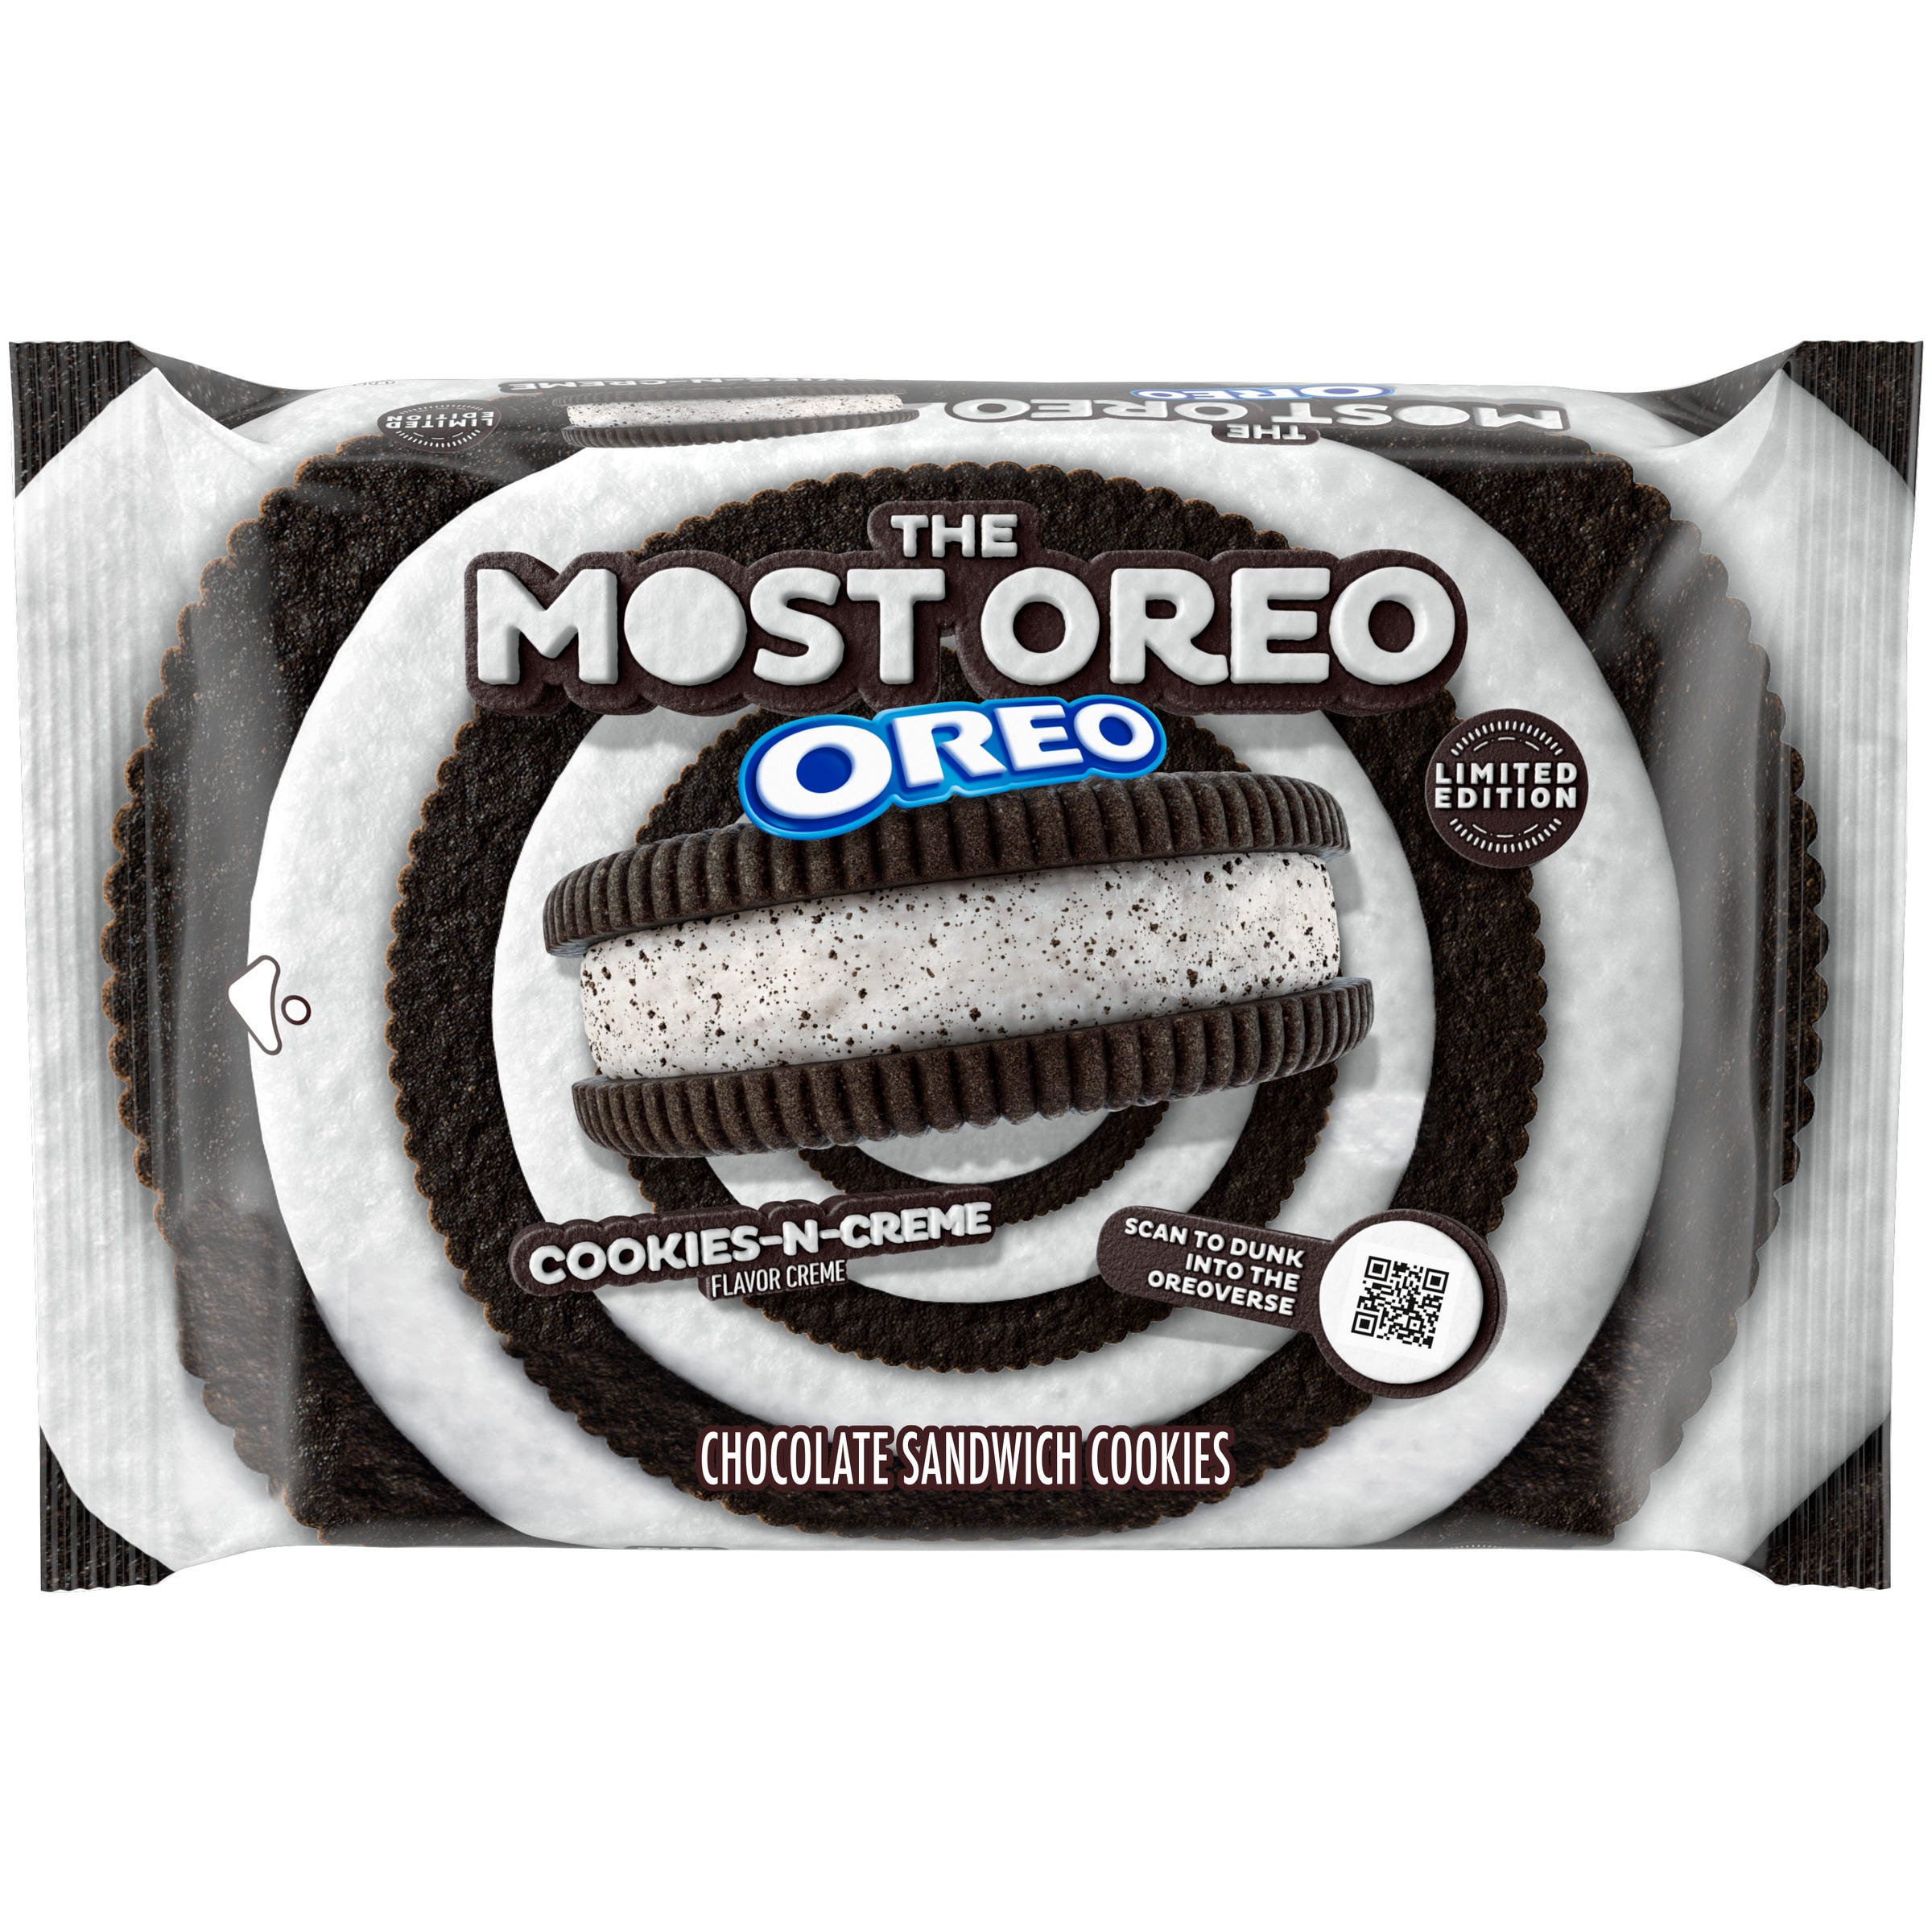 flavor: 'The Most Oreo cookie this month